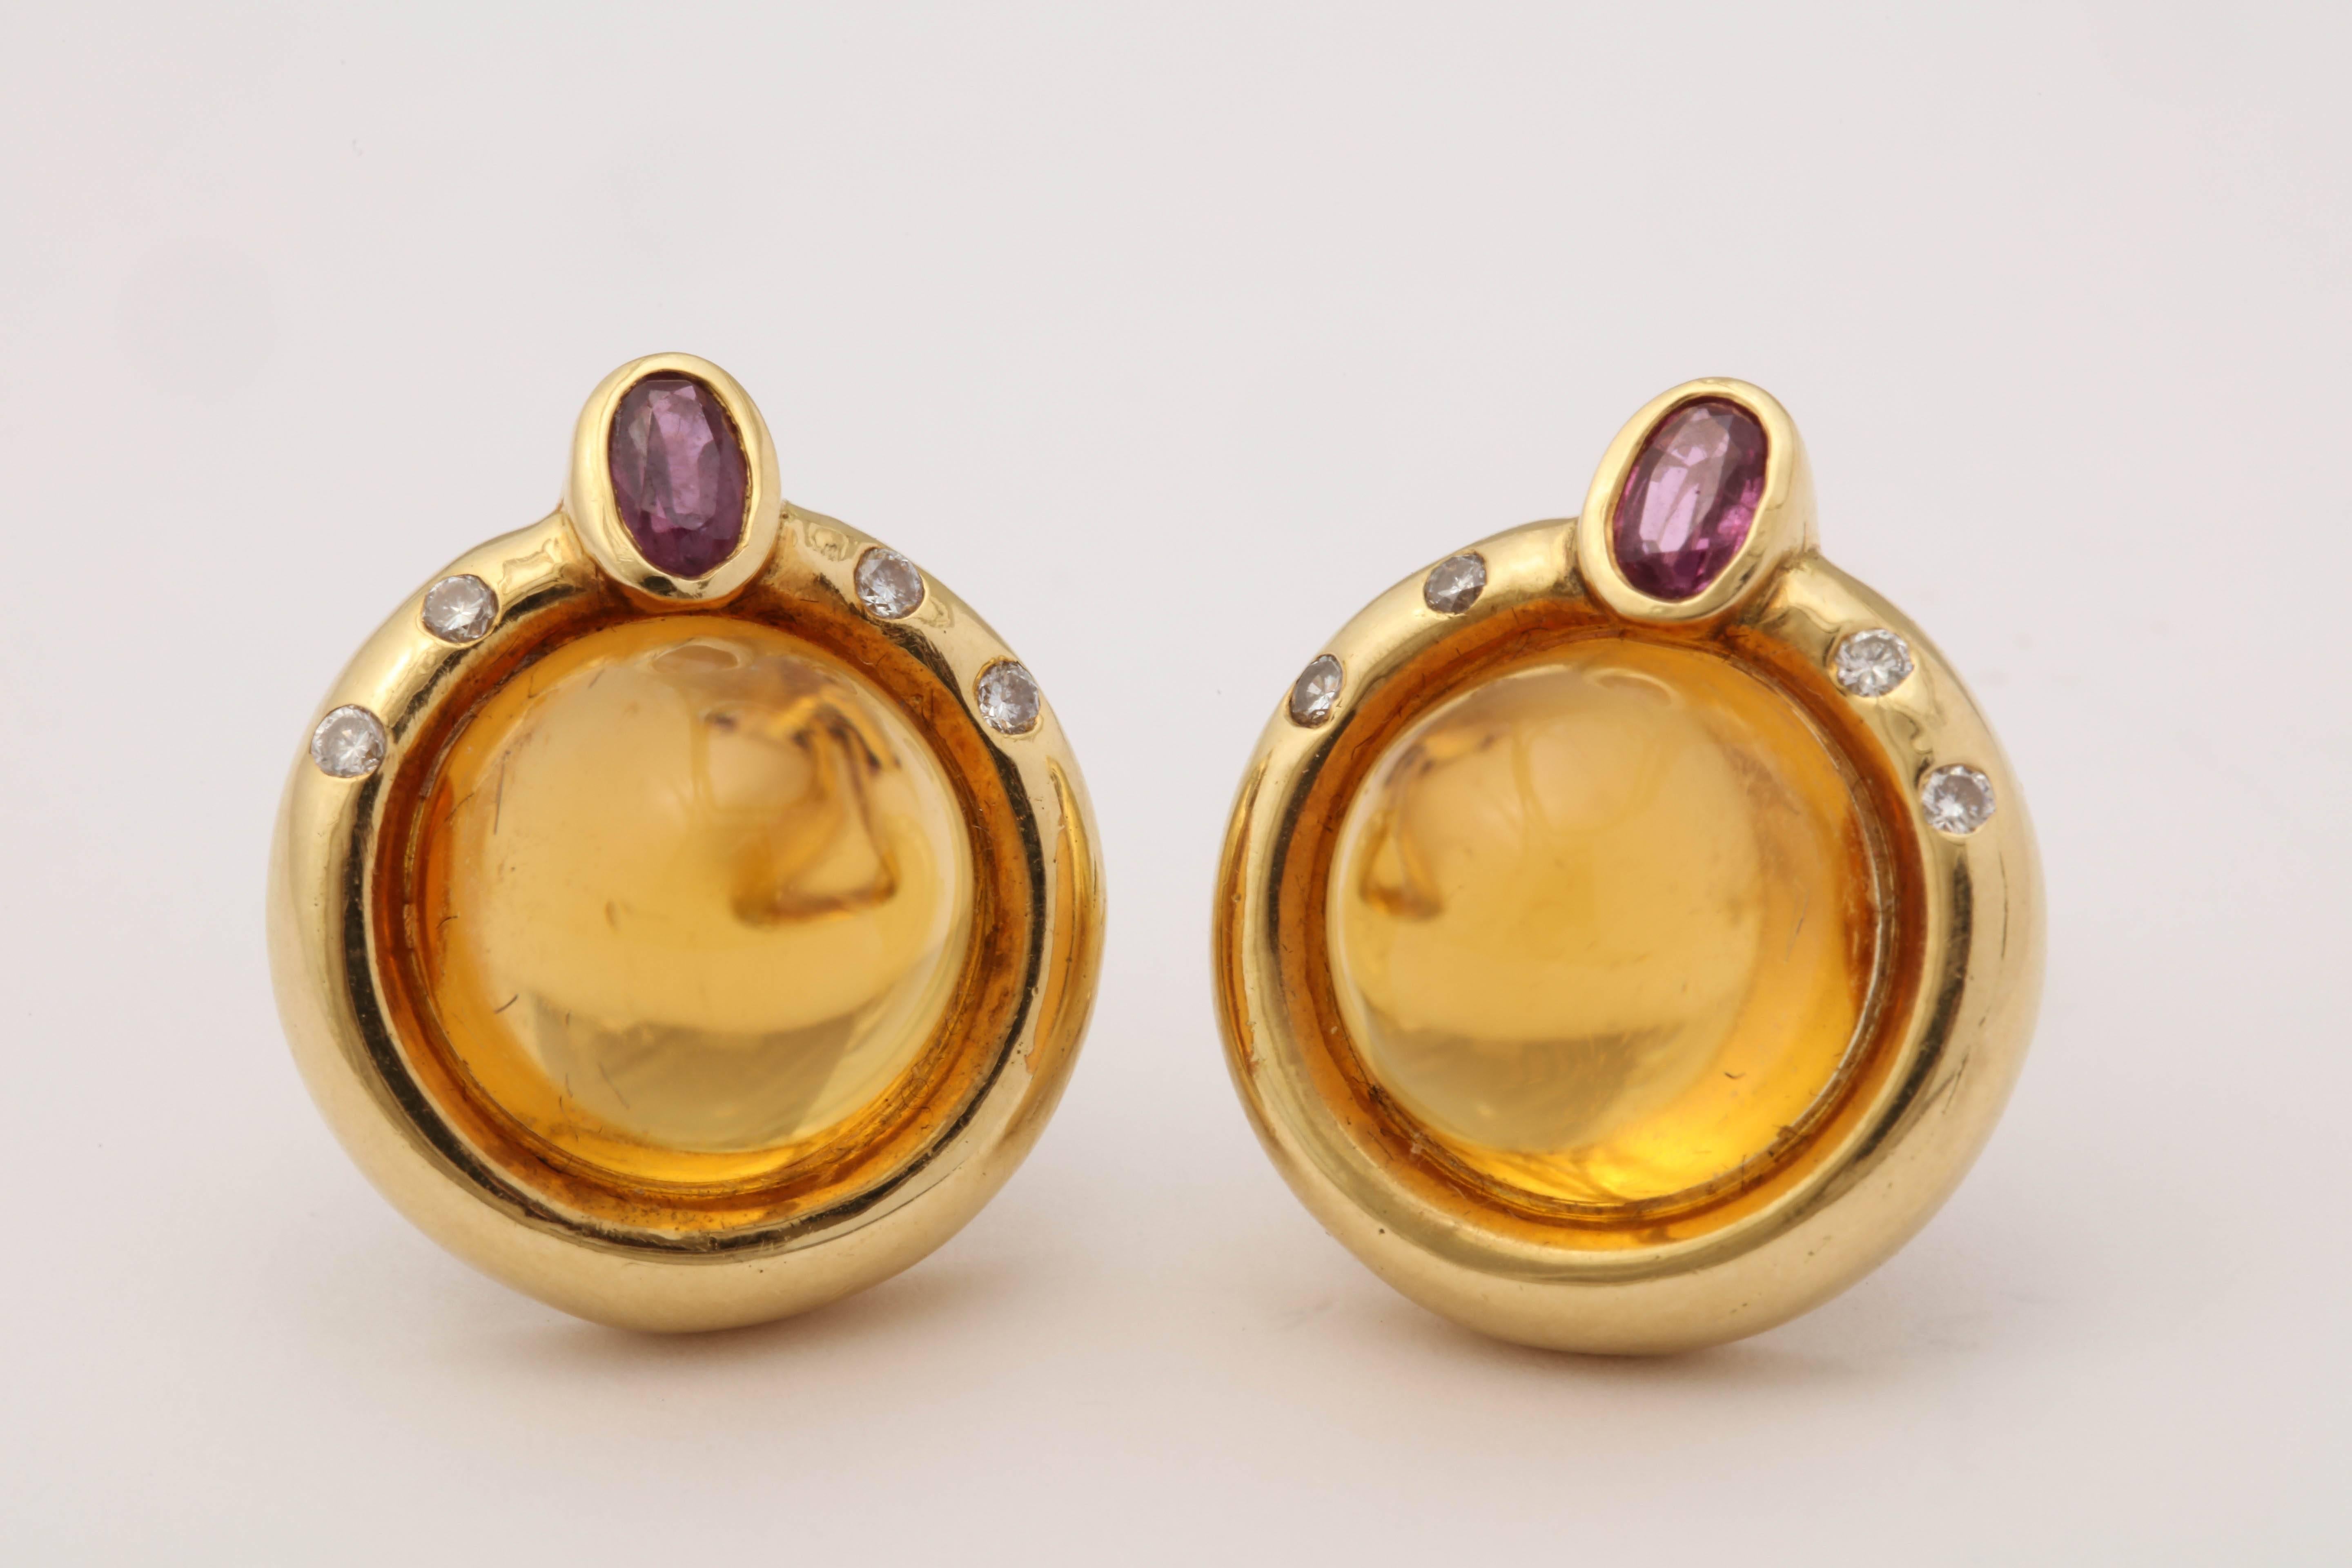 One Pair Of Ladies 18kt Yellow Gold Bezel Set Sugar Loaf Cut Cabochon Citrine Omega Back Clip On Earrings Embellished With Two Oval Cut Faceted Rubies On Top Weighing Approximately .60ct Total Weight. Further Designed With Eight Full Cut High